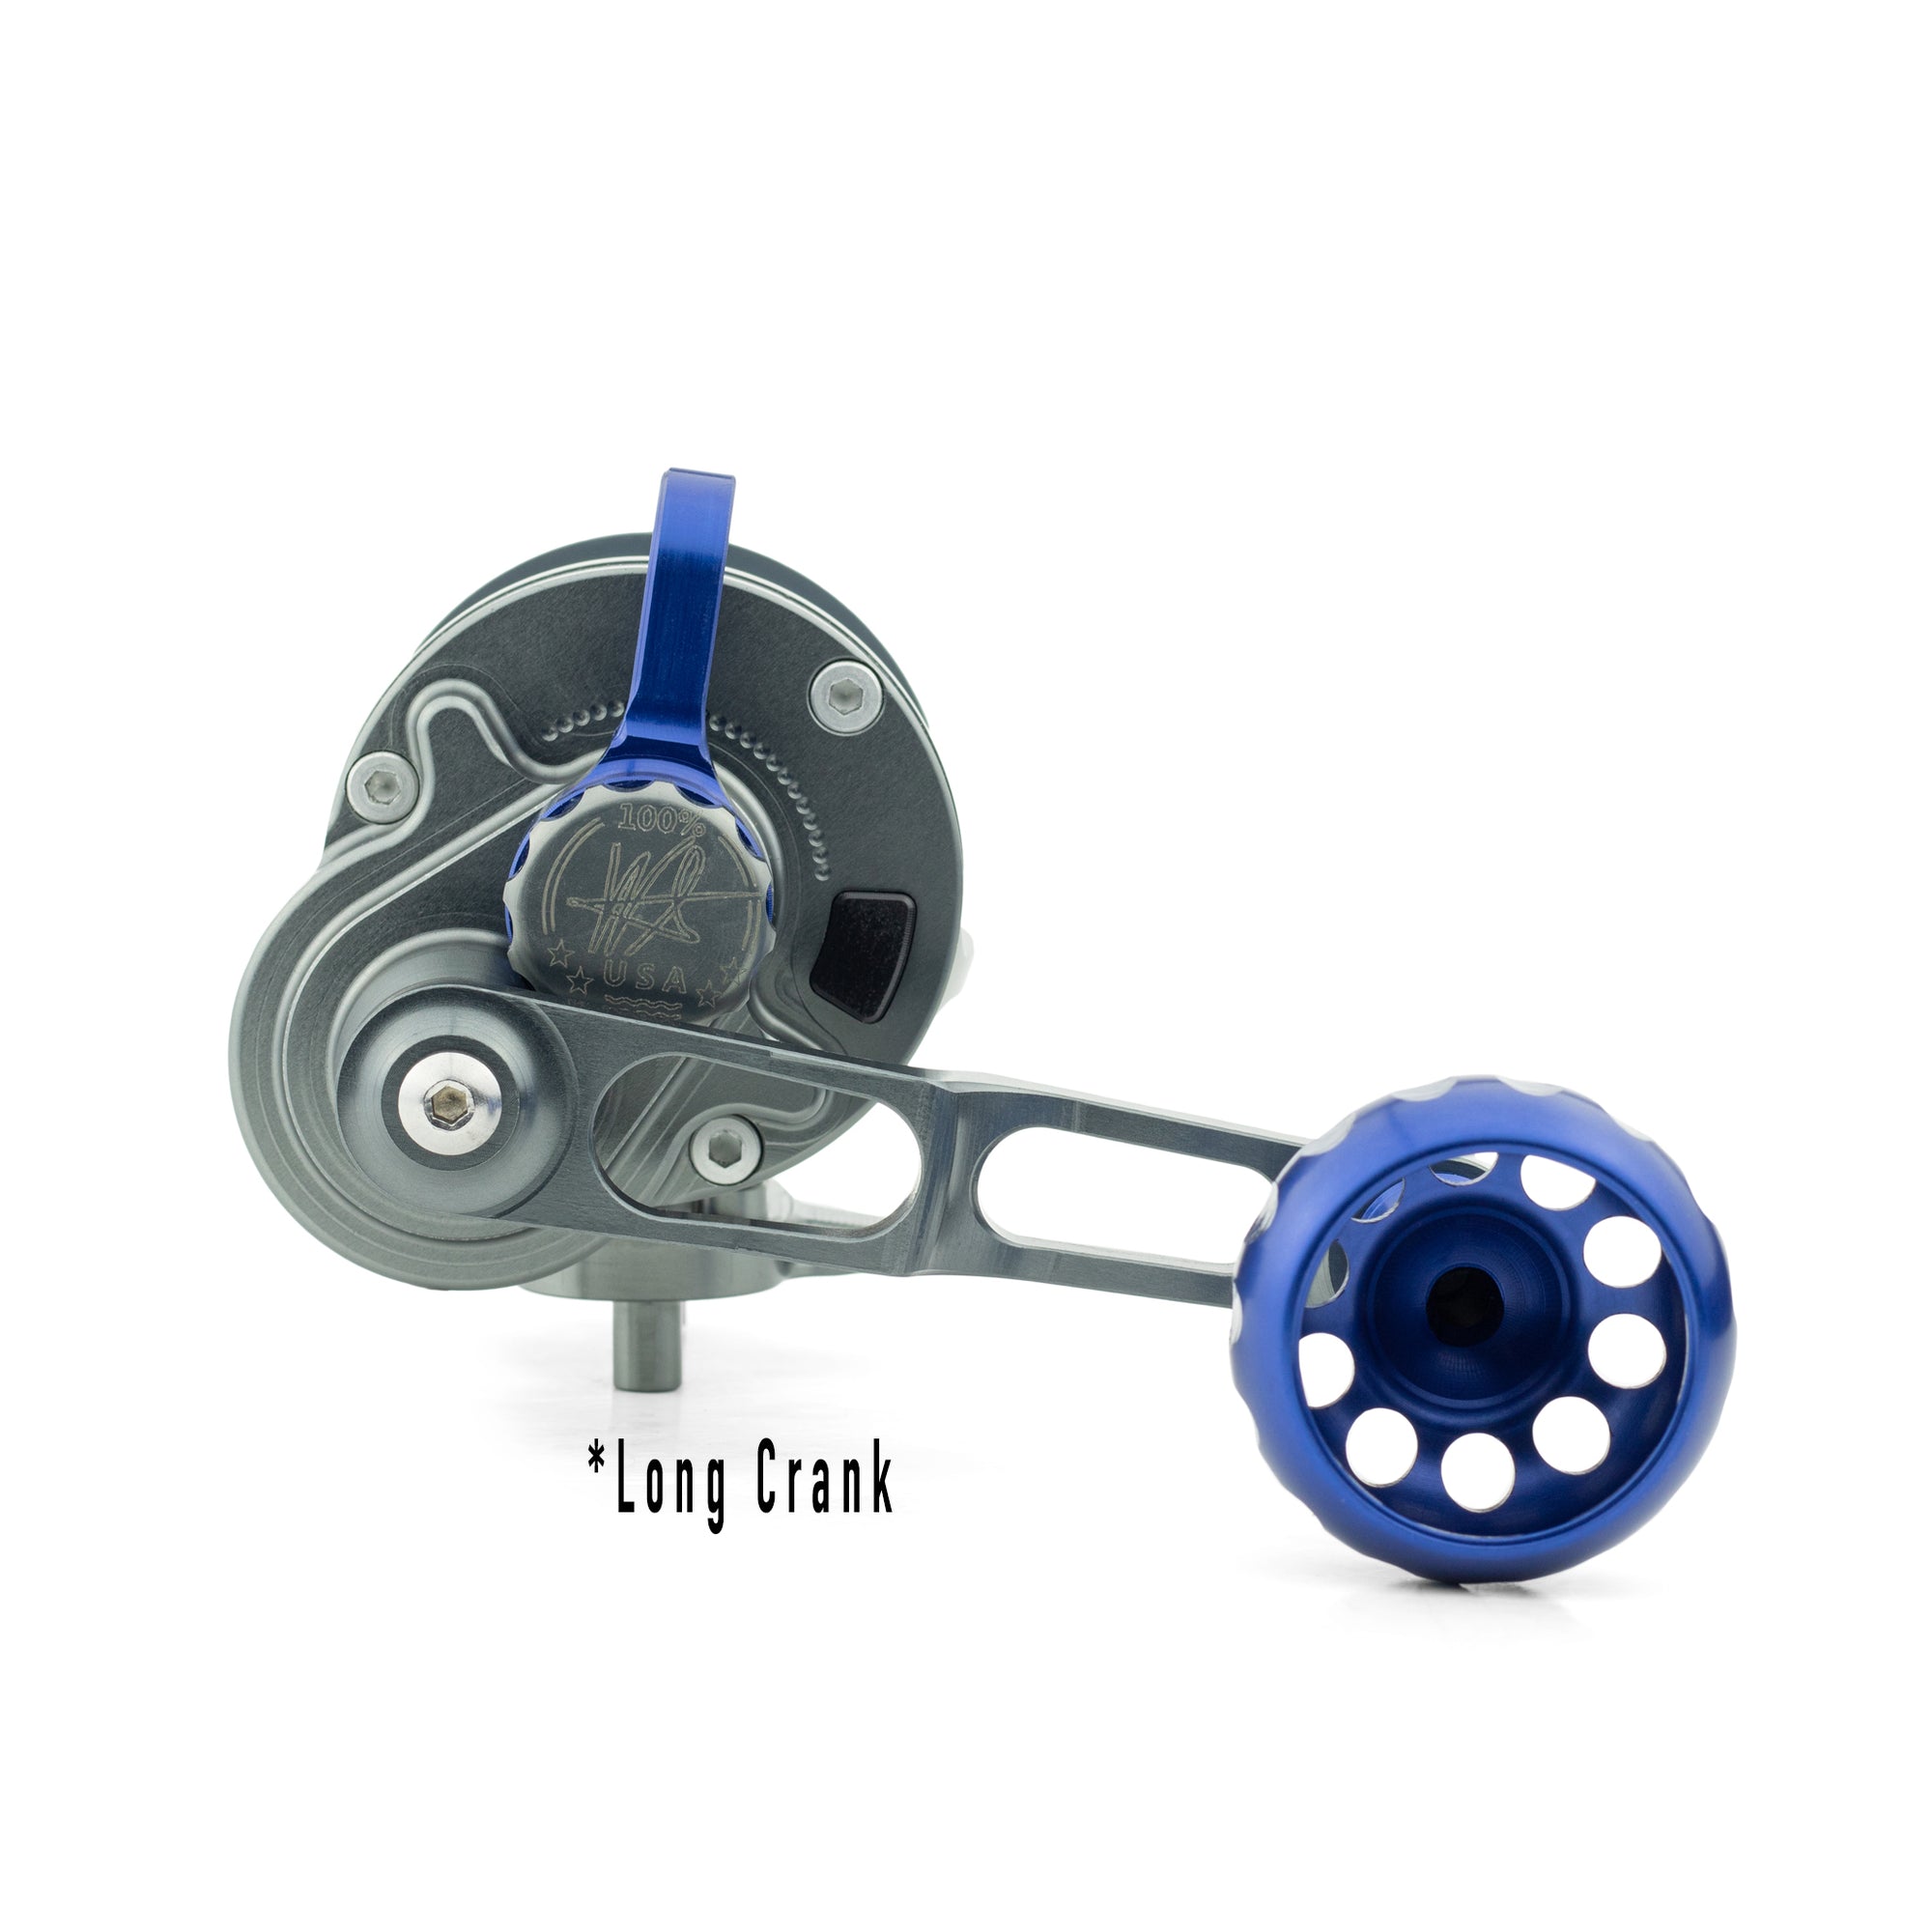 Seigler Fishing Reels - The SGNarrow Star is simply built to last